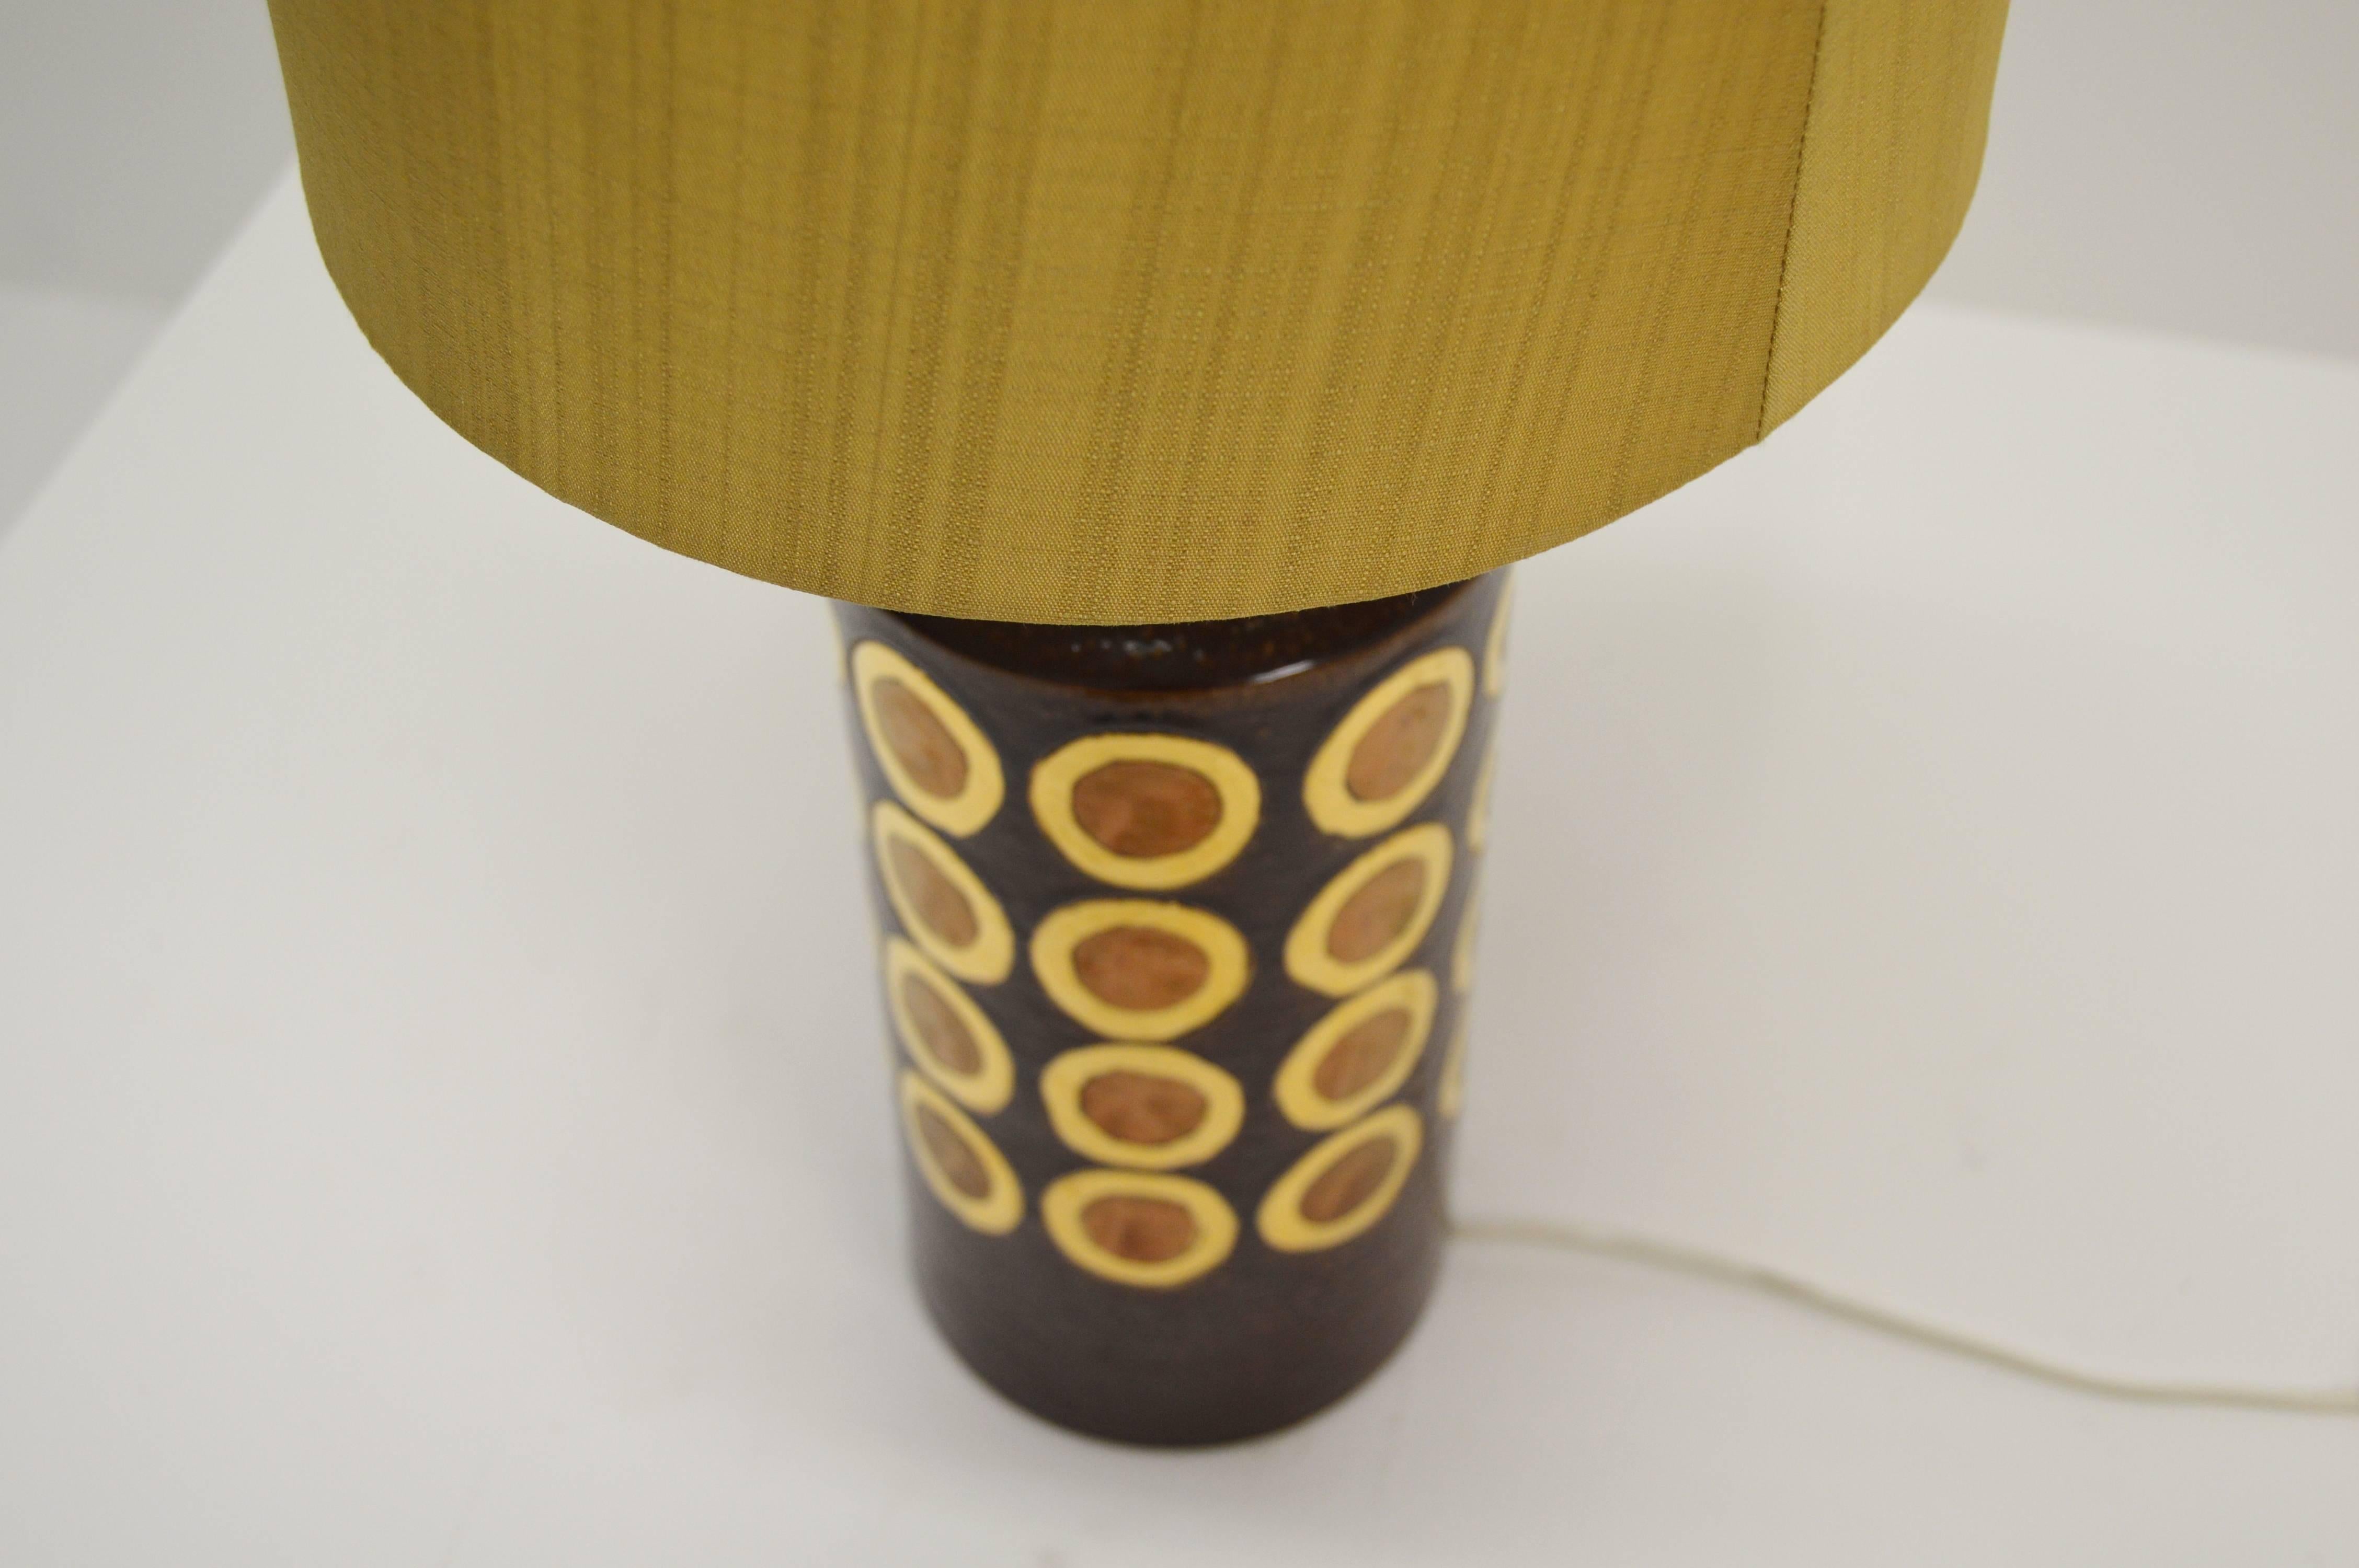 Table lamp manufactured by Bitossi Italy and imported to Sweden by Miranda AB in the 1960s.
Original lampshade with signs of usage. The ceramic foot in vey good condition.

Height with lampshade 53 cm, diameter 23 cm
Measurements below is given